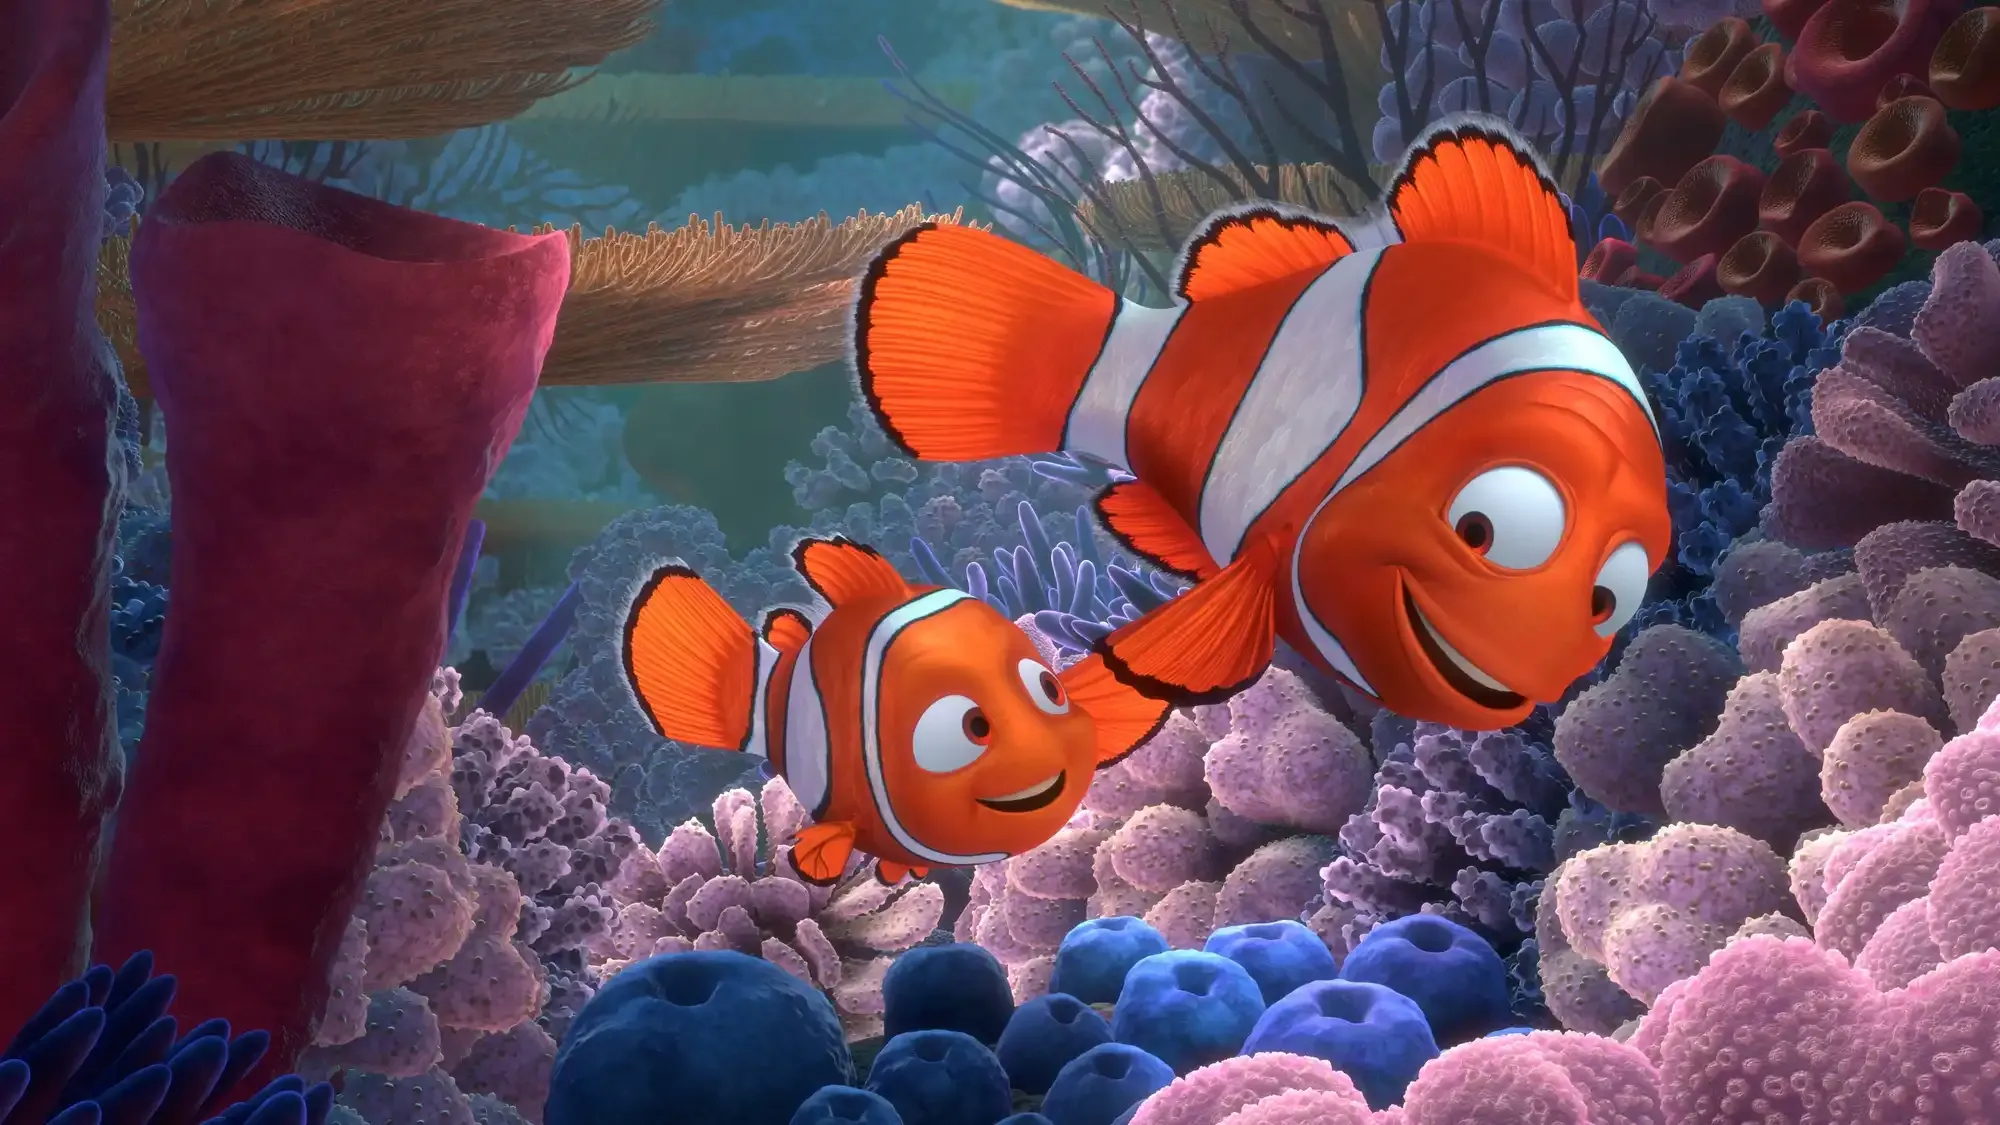 Finding Nemo movie review